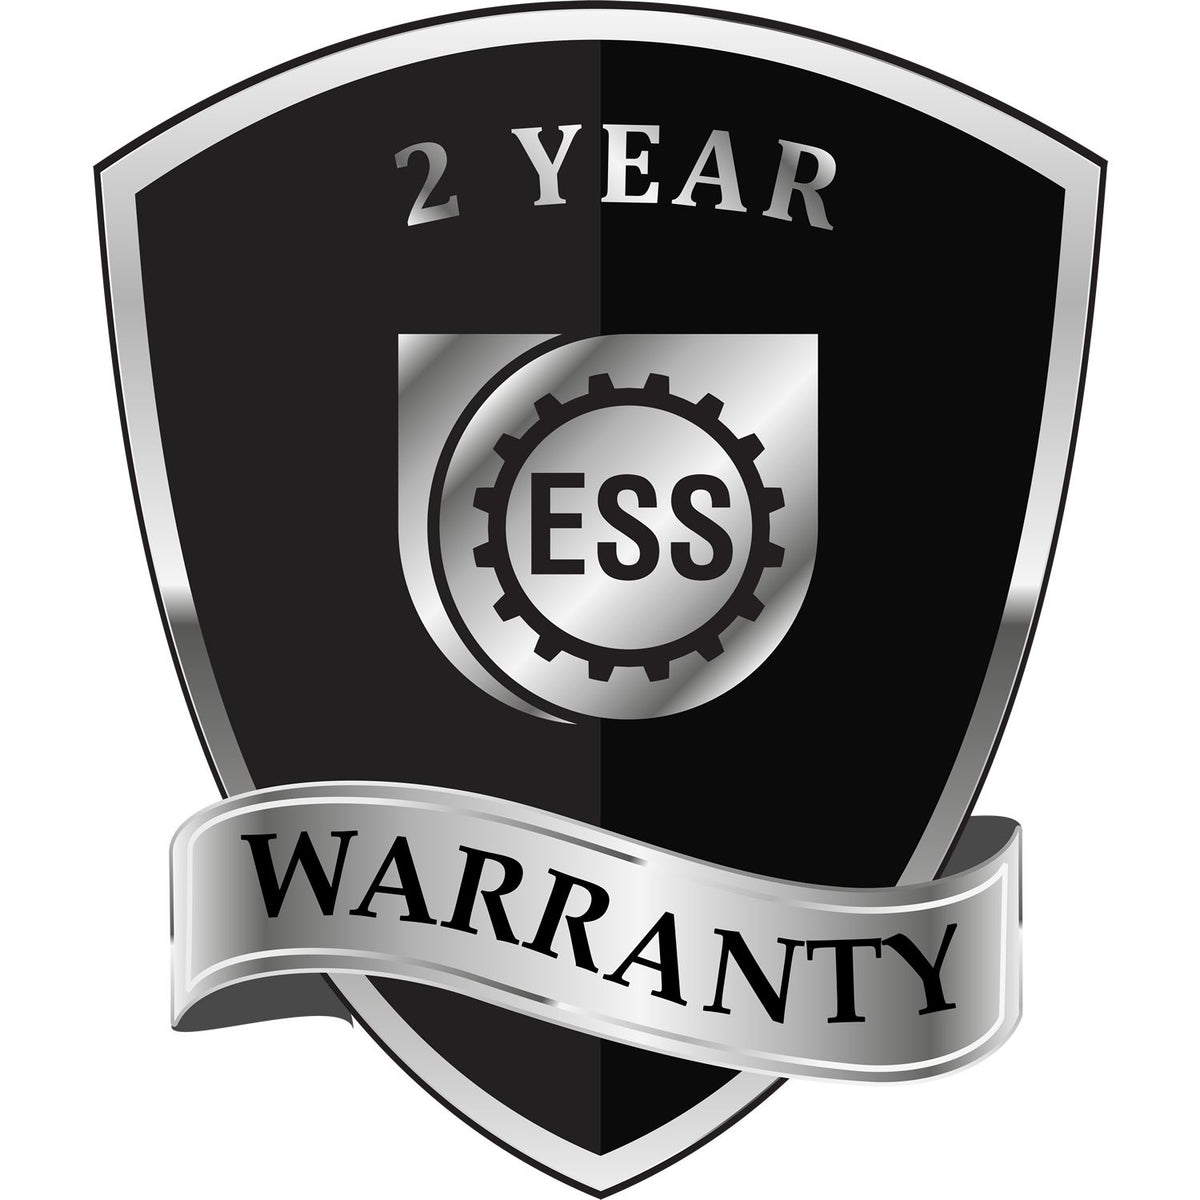 A black and silver badge or emblem showing warranty information for the Hybrid Arkansas Geologist Seal